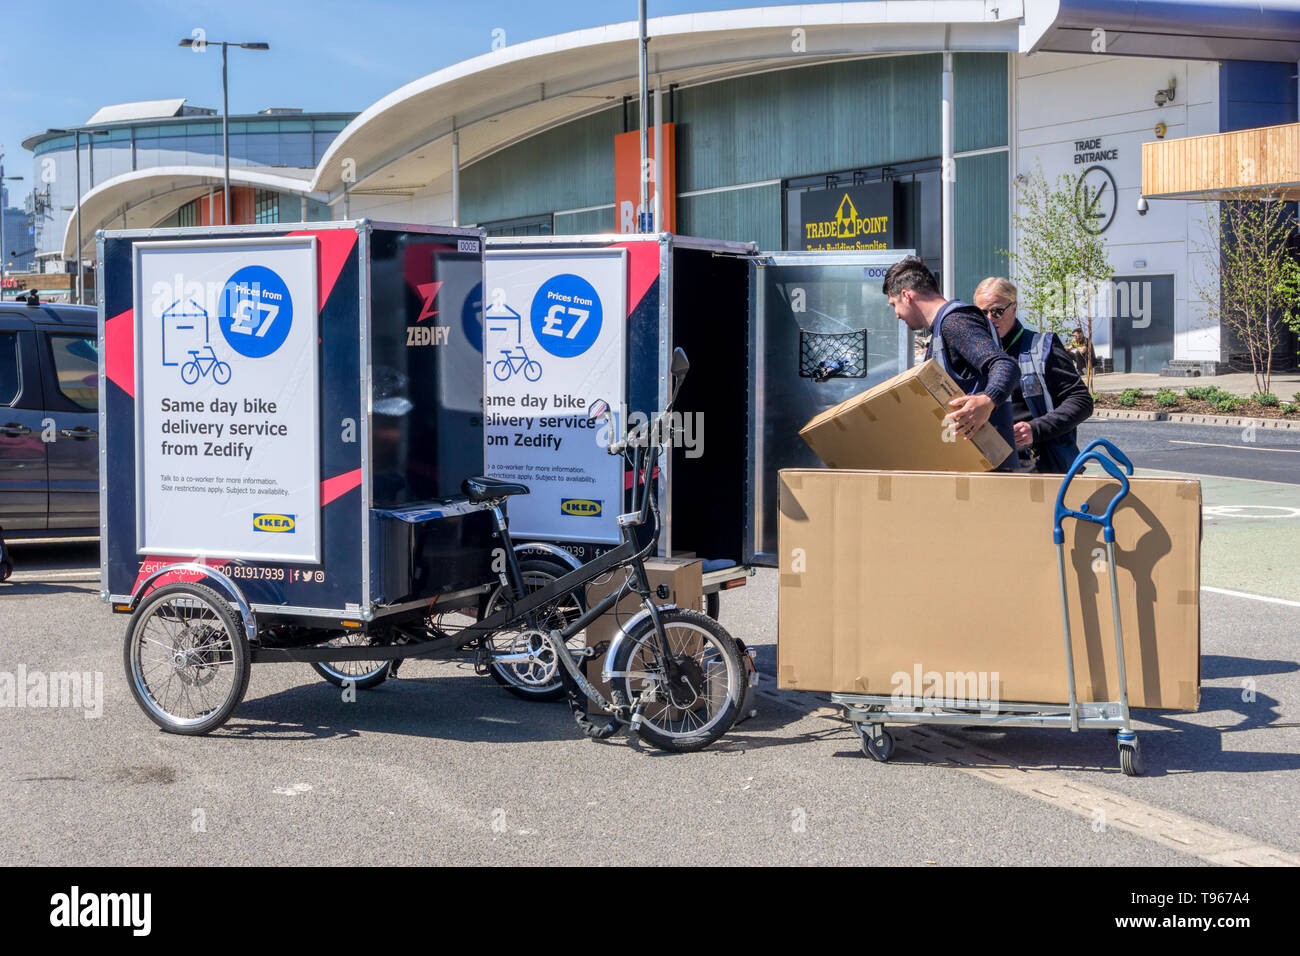 Zedify bike delivery service with riders loading parcels for delivery from IKEA store on Greenwich Peninsula. Stock Photo